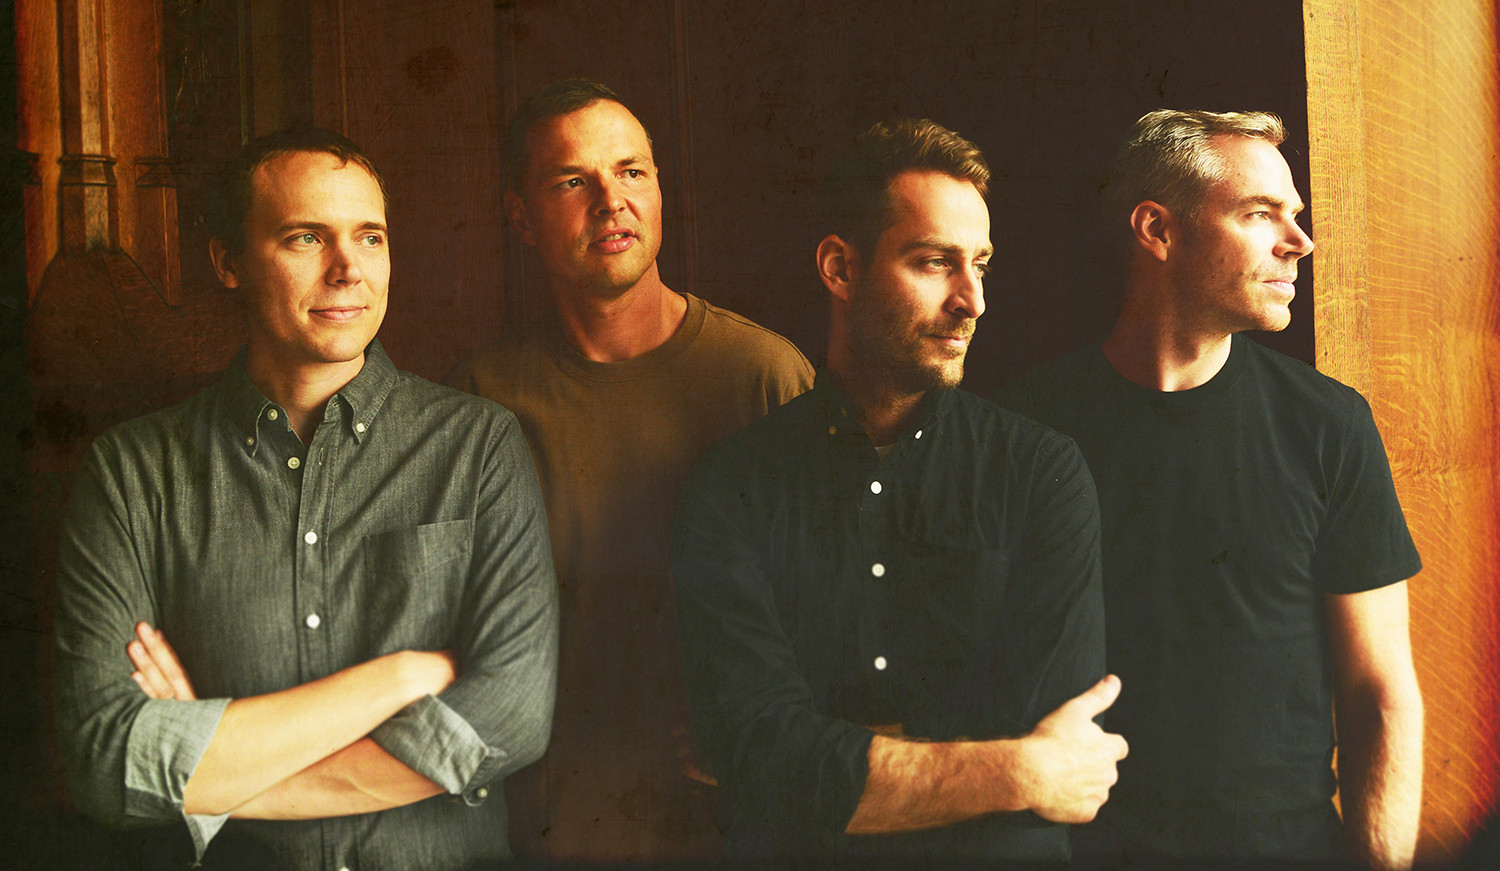 New Album Releases: AMERICAN FOOTBALL (LP3) - American Football | The